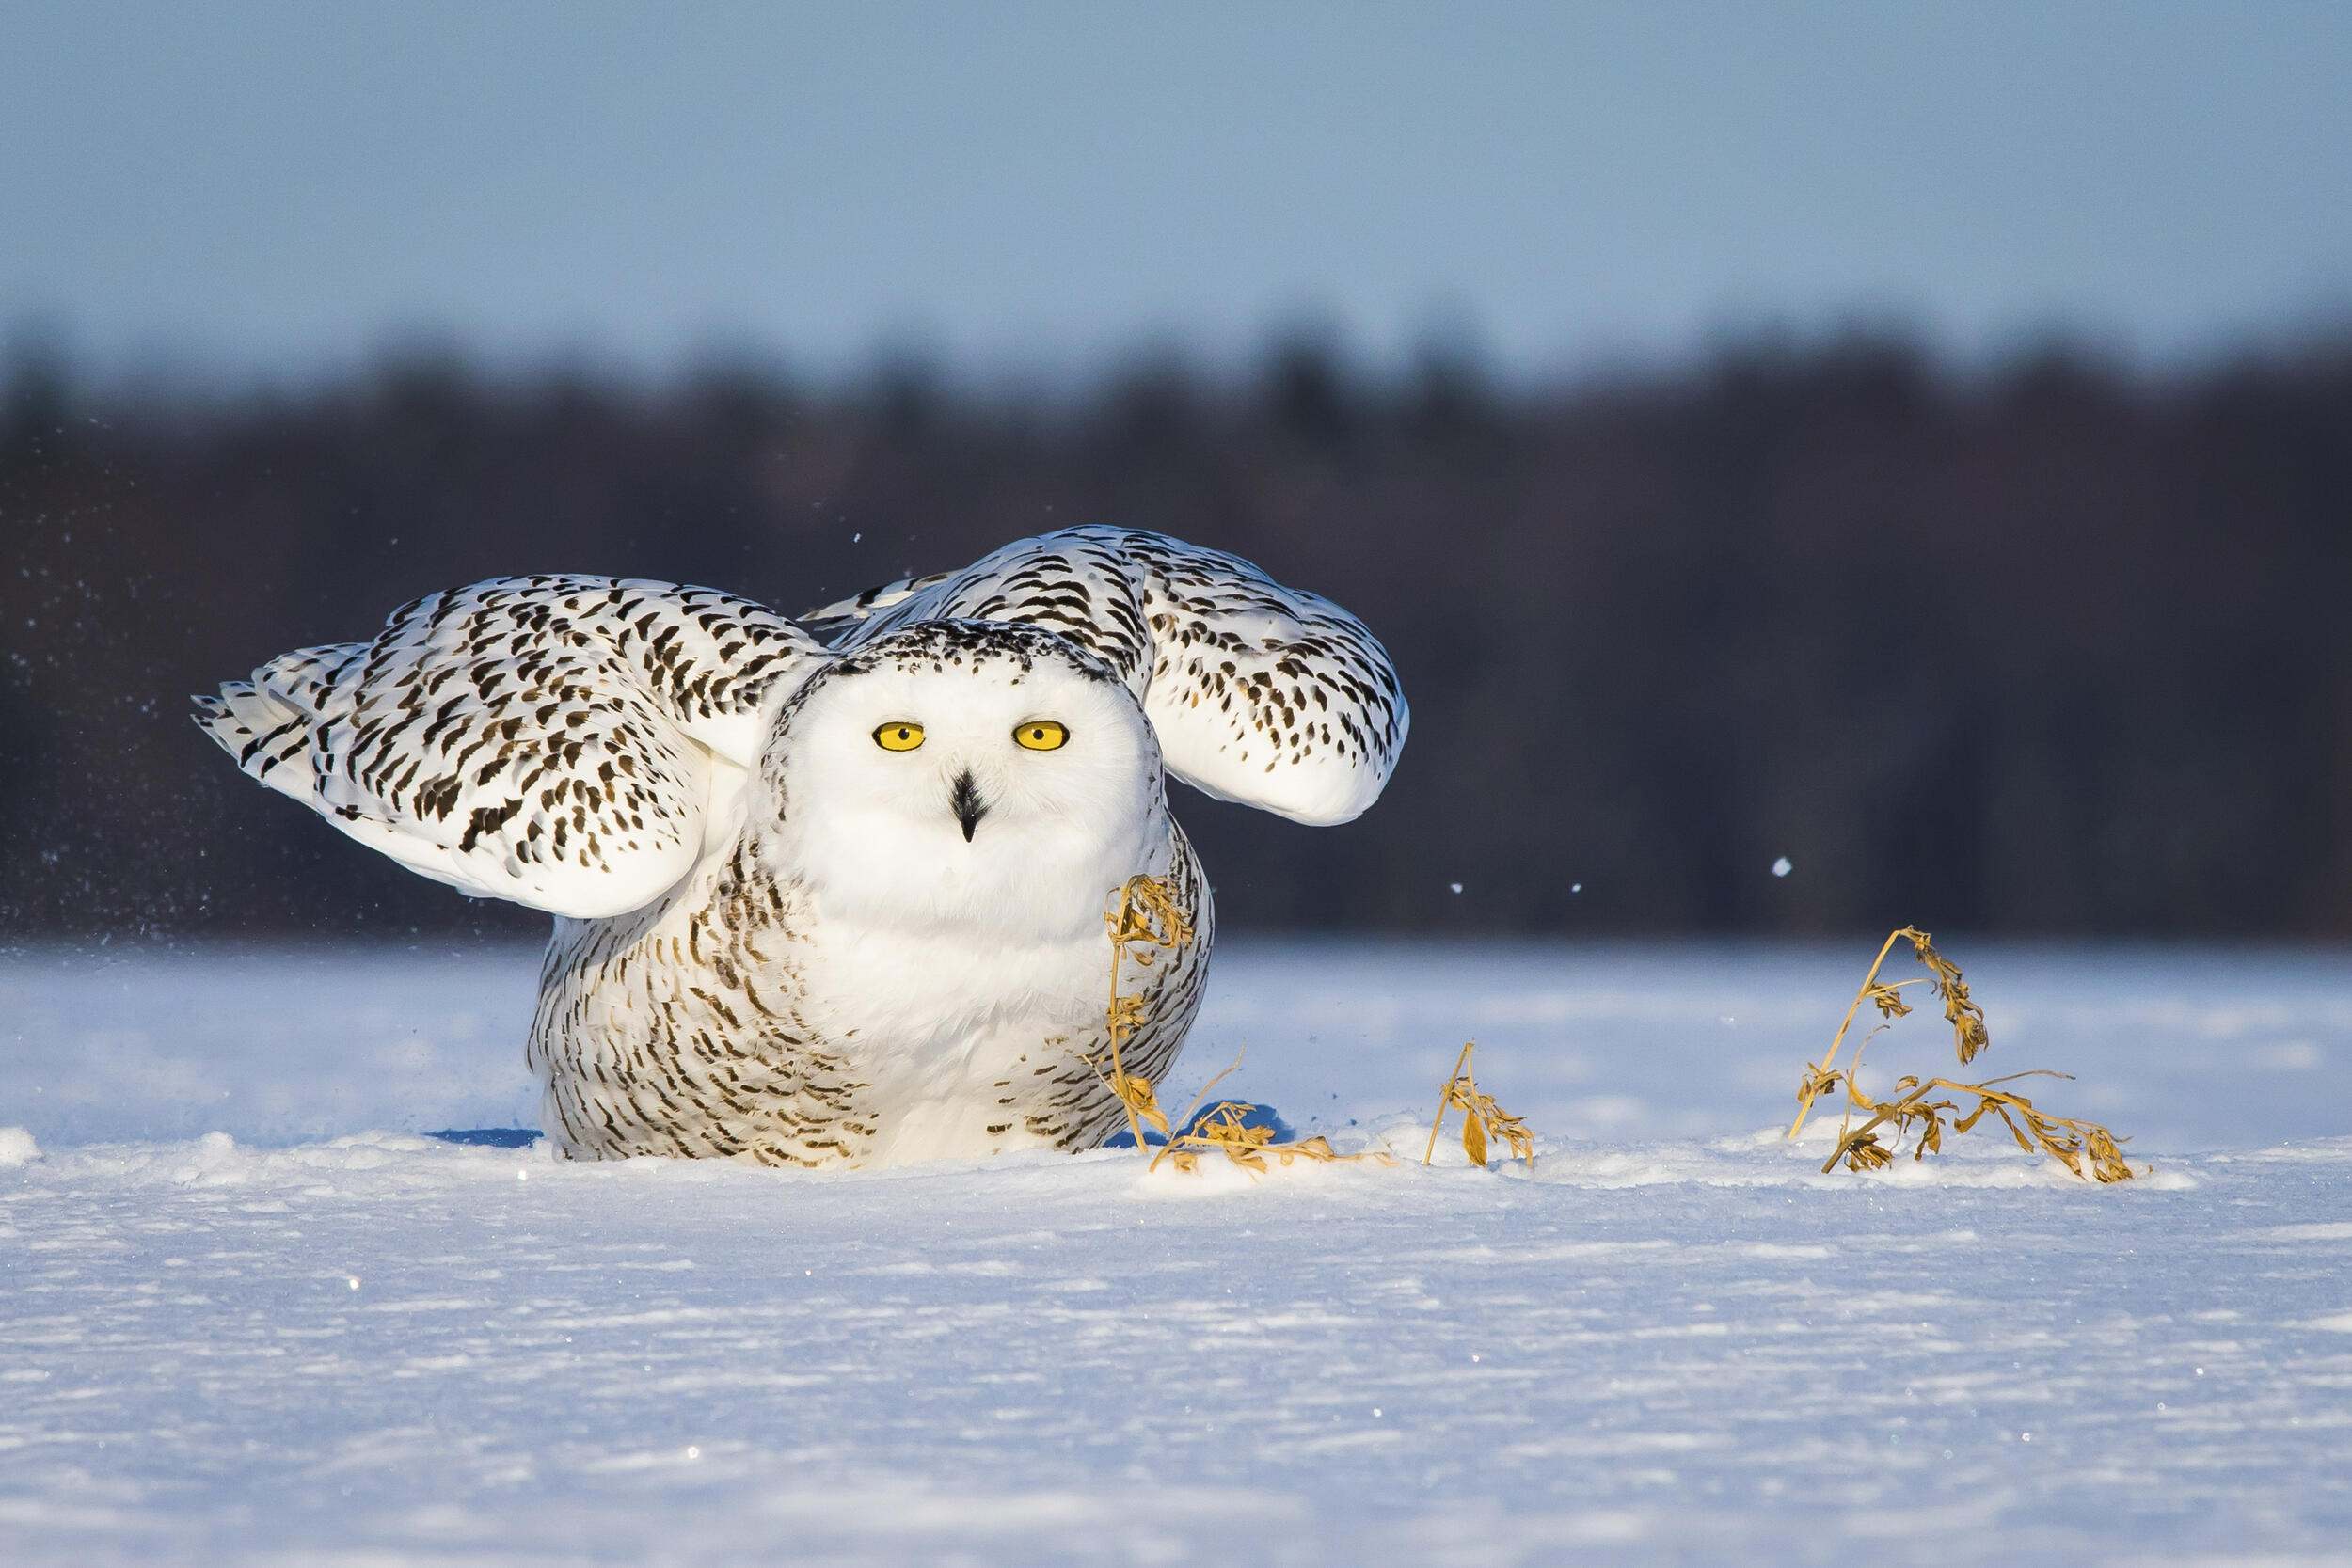 Snowy owls are known to migrate as far south as the northern United States in the winter.